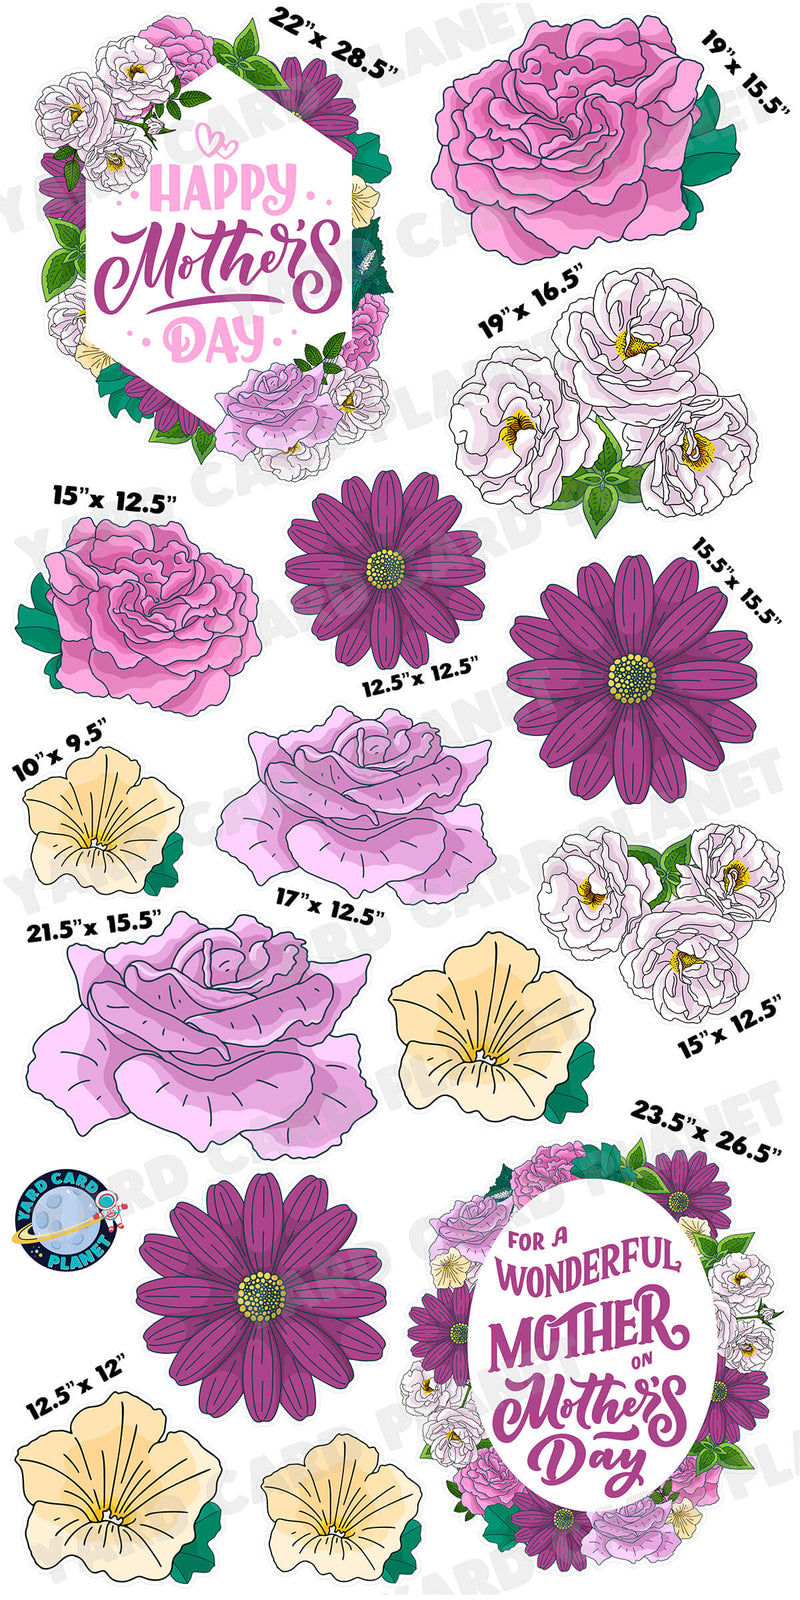 Happy Mother's Day Floral Signs and Yard Card Flair Set